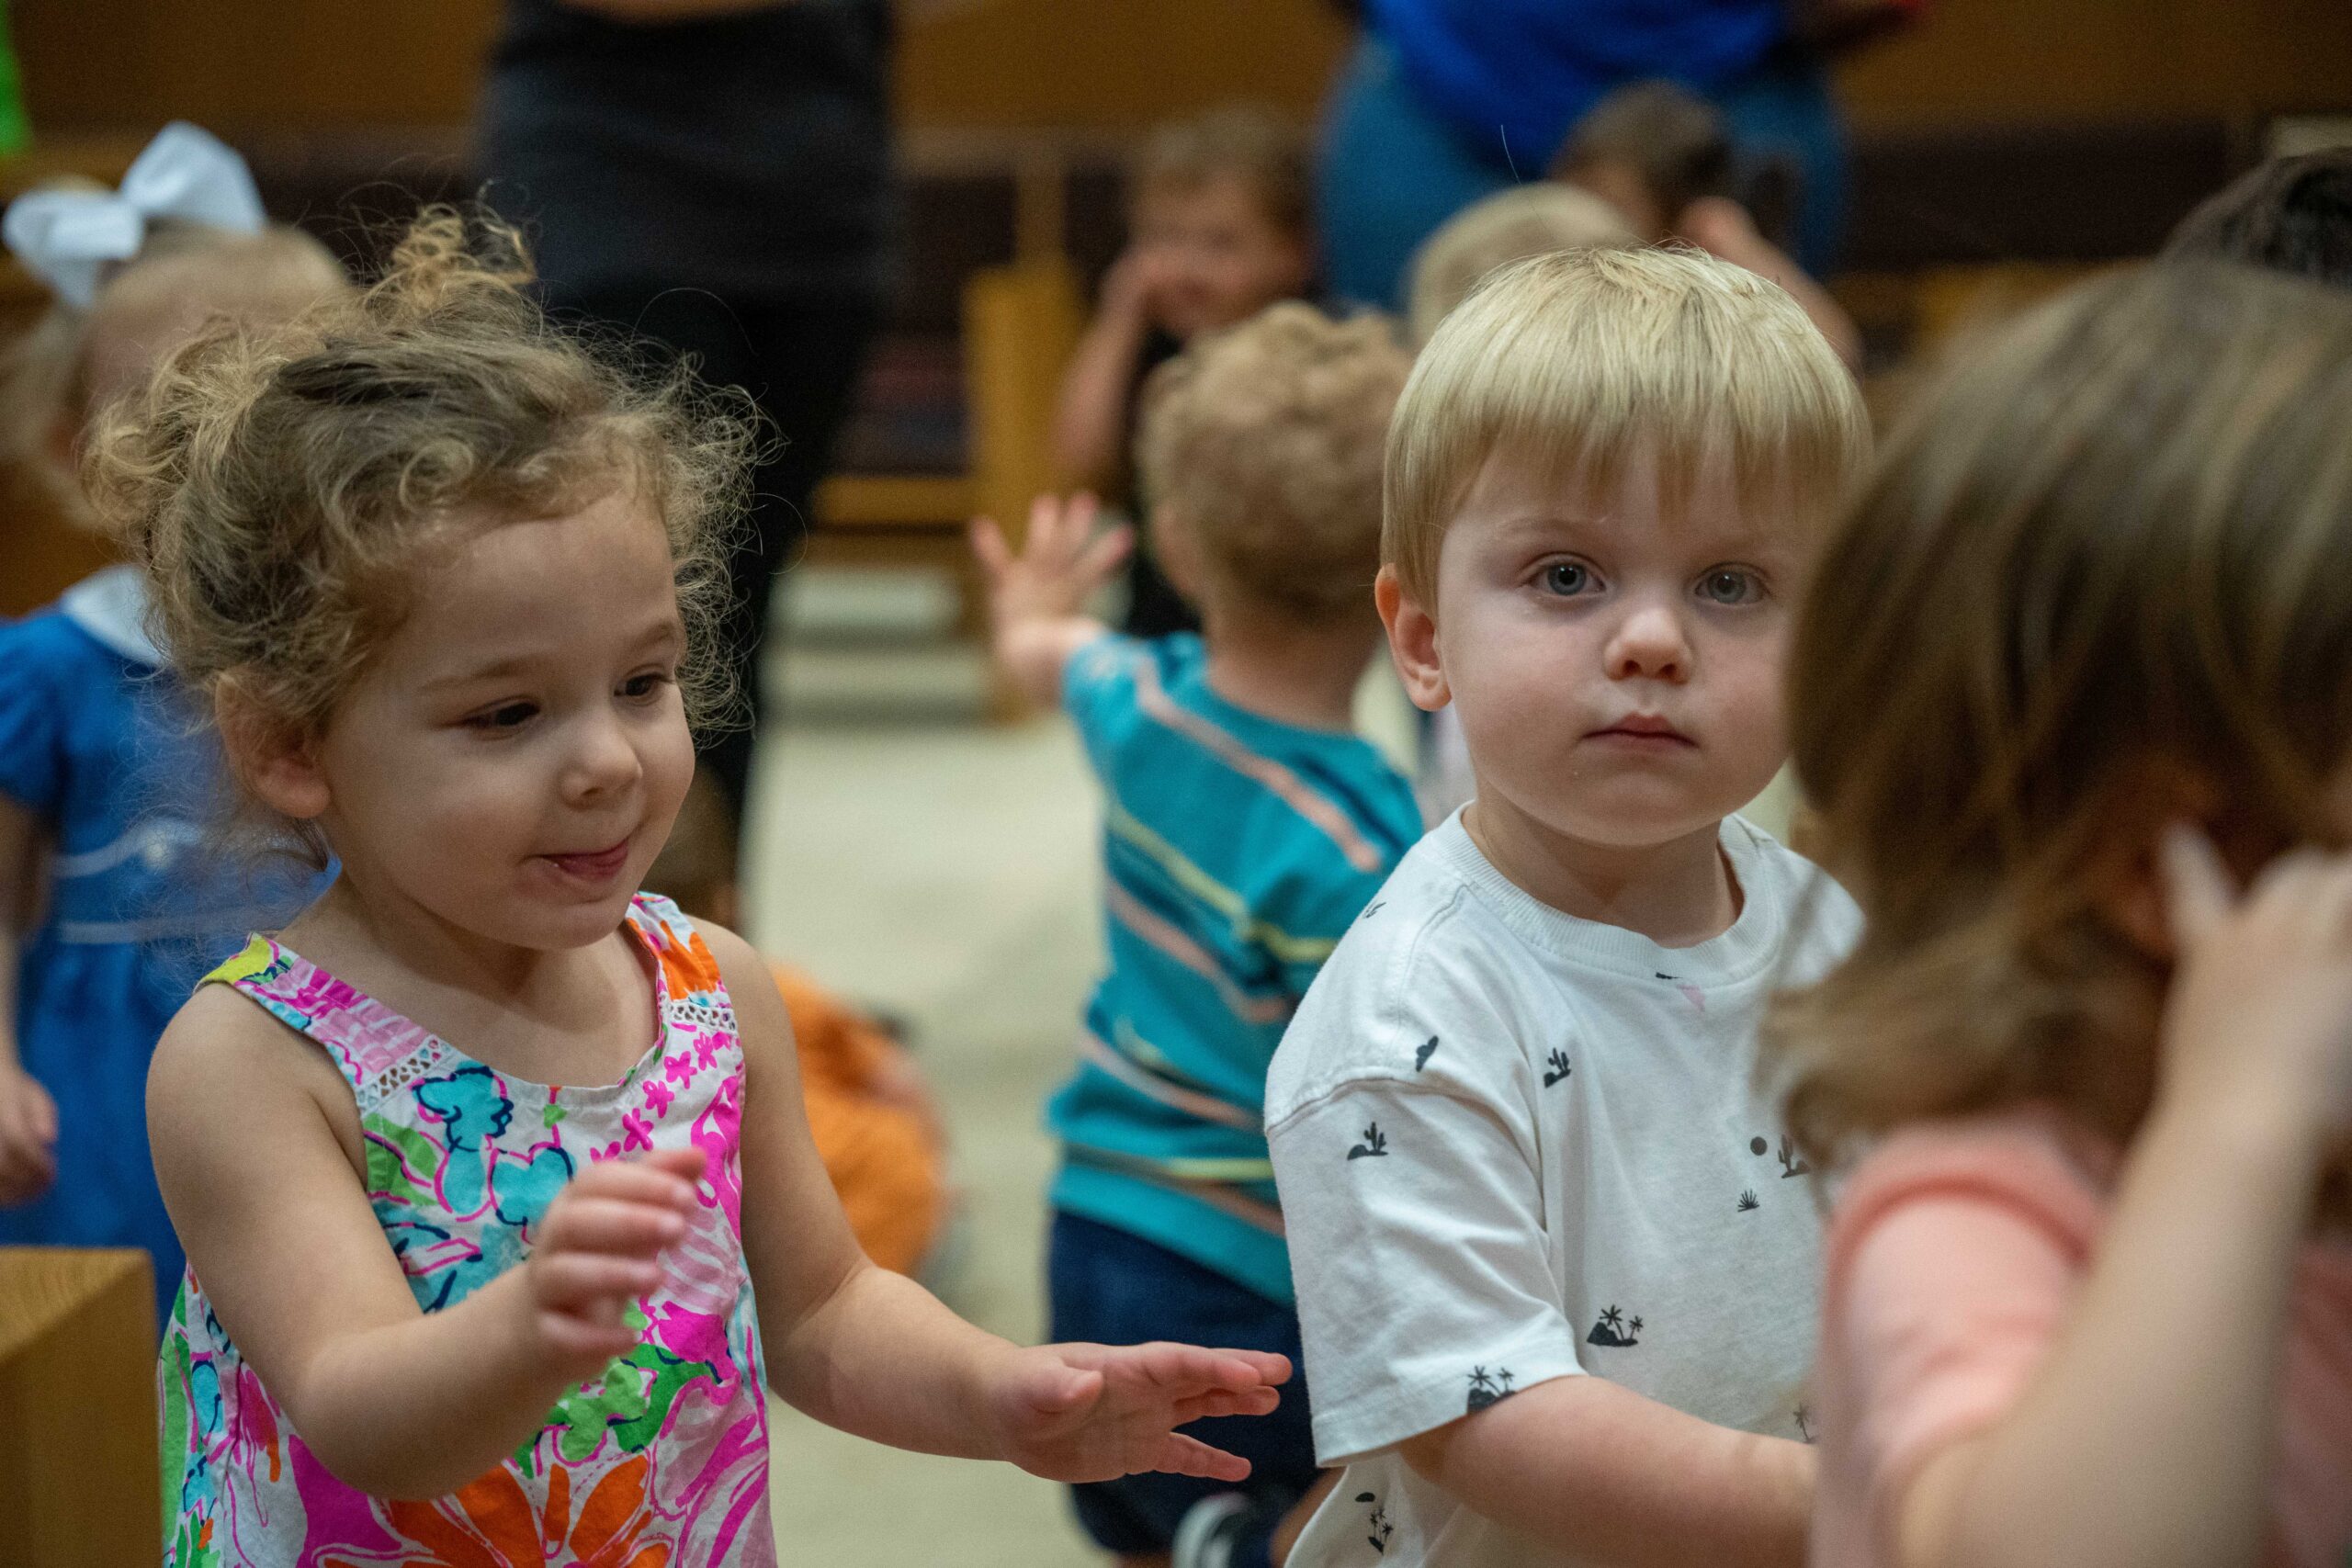 This photo is taken at toddler eye level. One boy in a white shirt with blond hair looks at the camera. A little girl with curly hair and a multi-colored shirt looks to the side. More children are in the background out of focus.